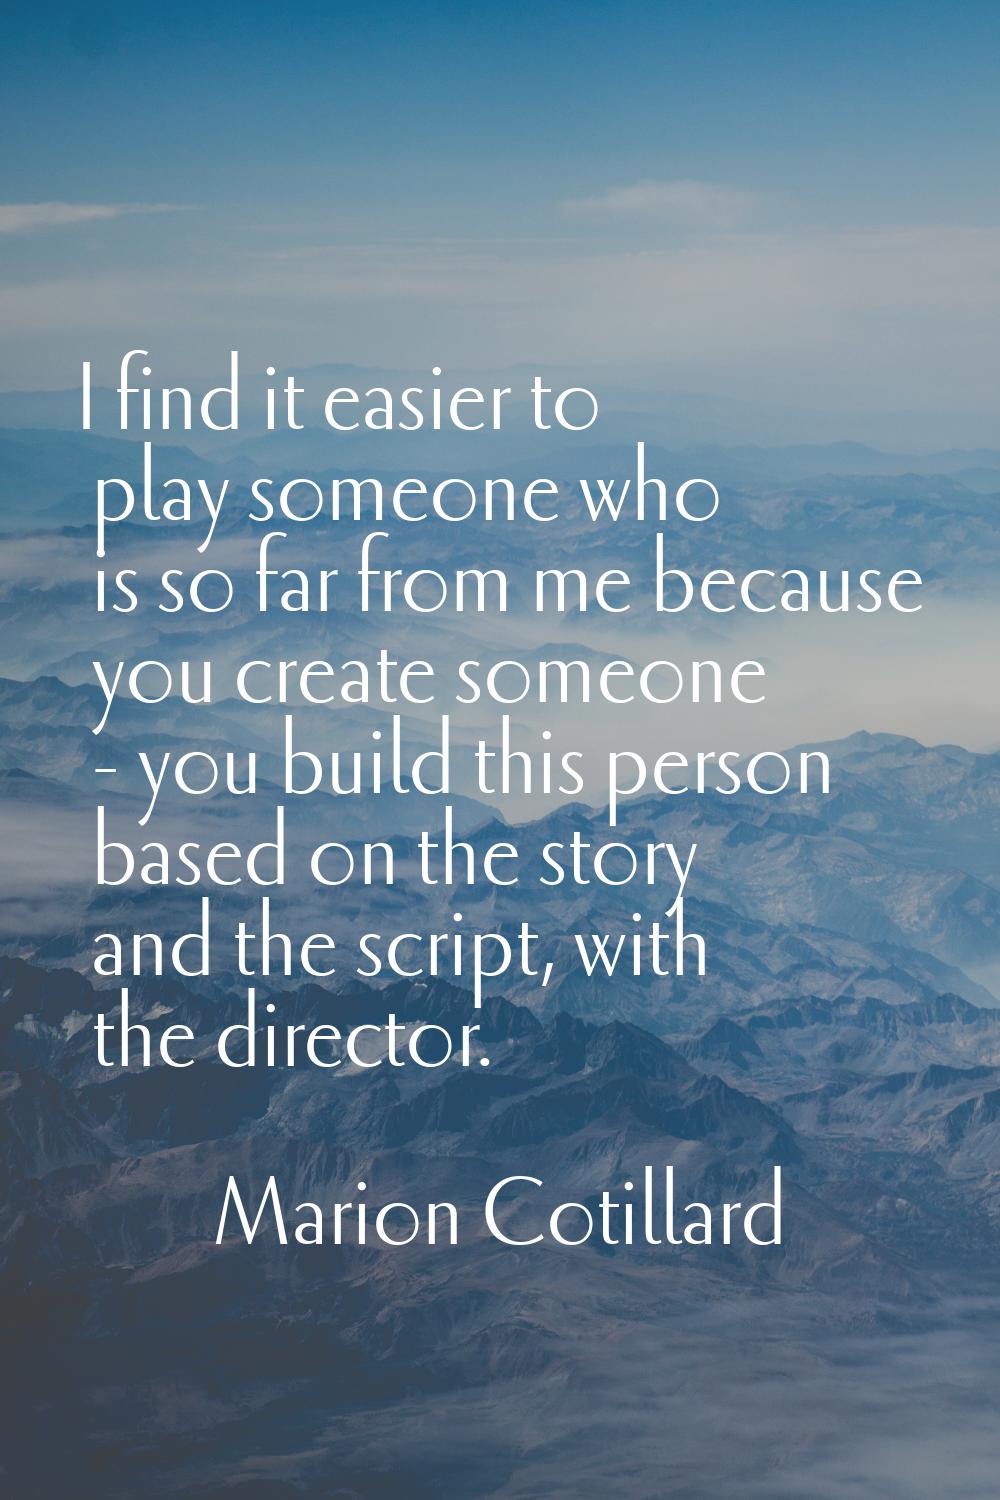 I find it easier to play someone who is so far from me because you create someone - you build this 